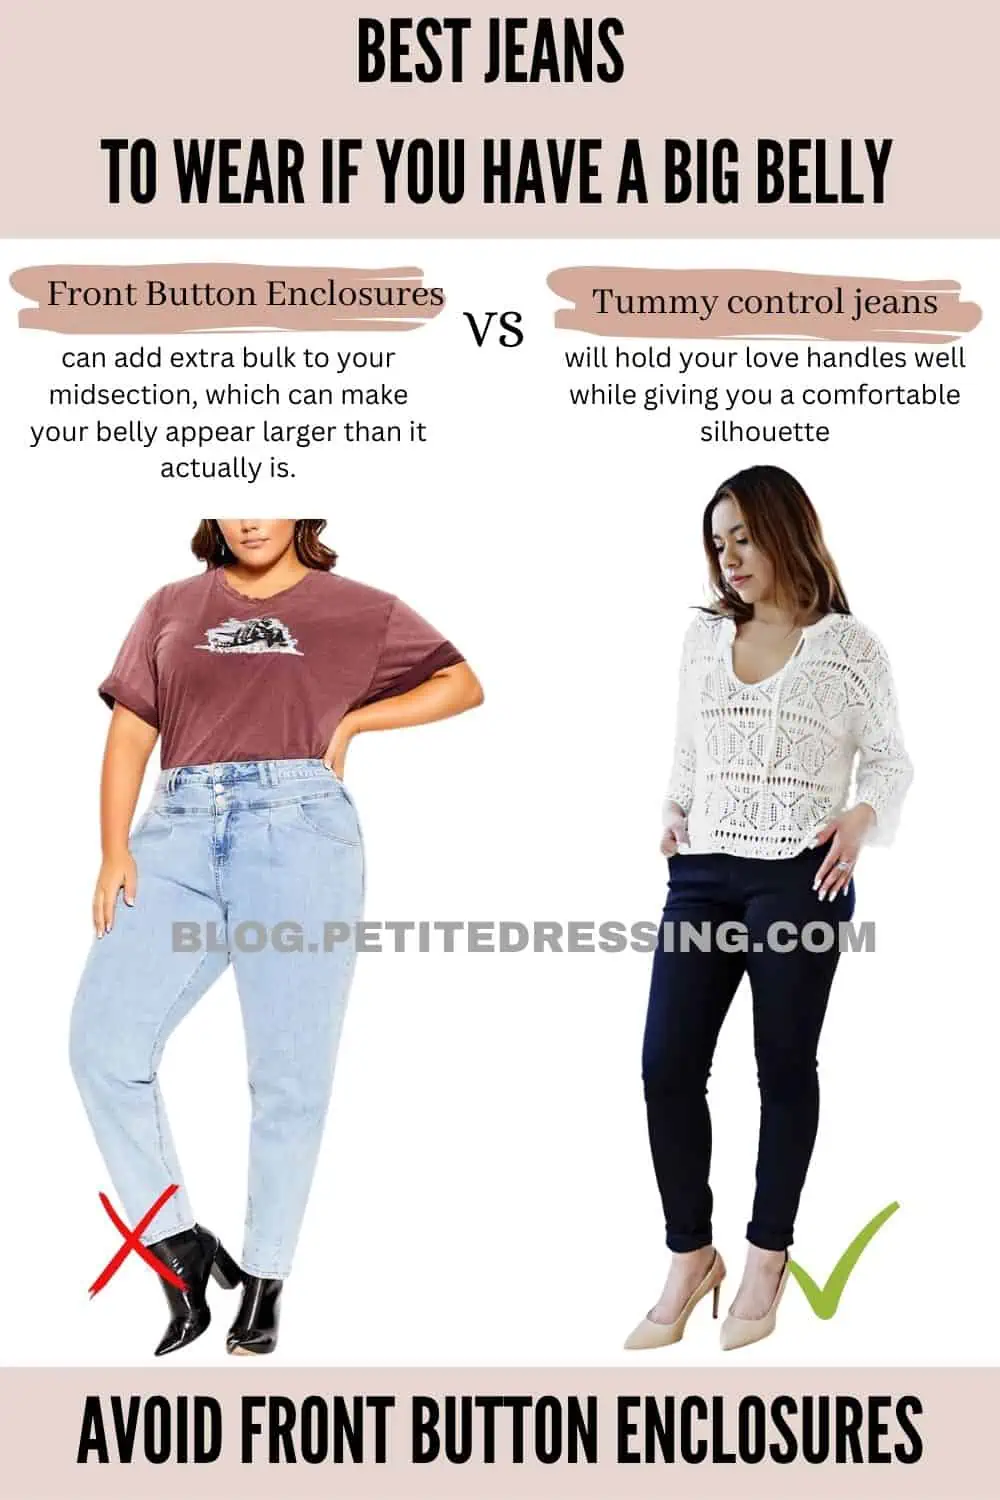 Best Jeans to wear if you have a Big Belly - Petite Dressing